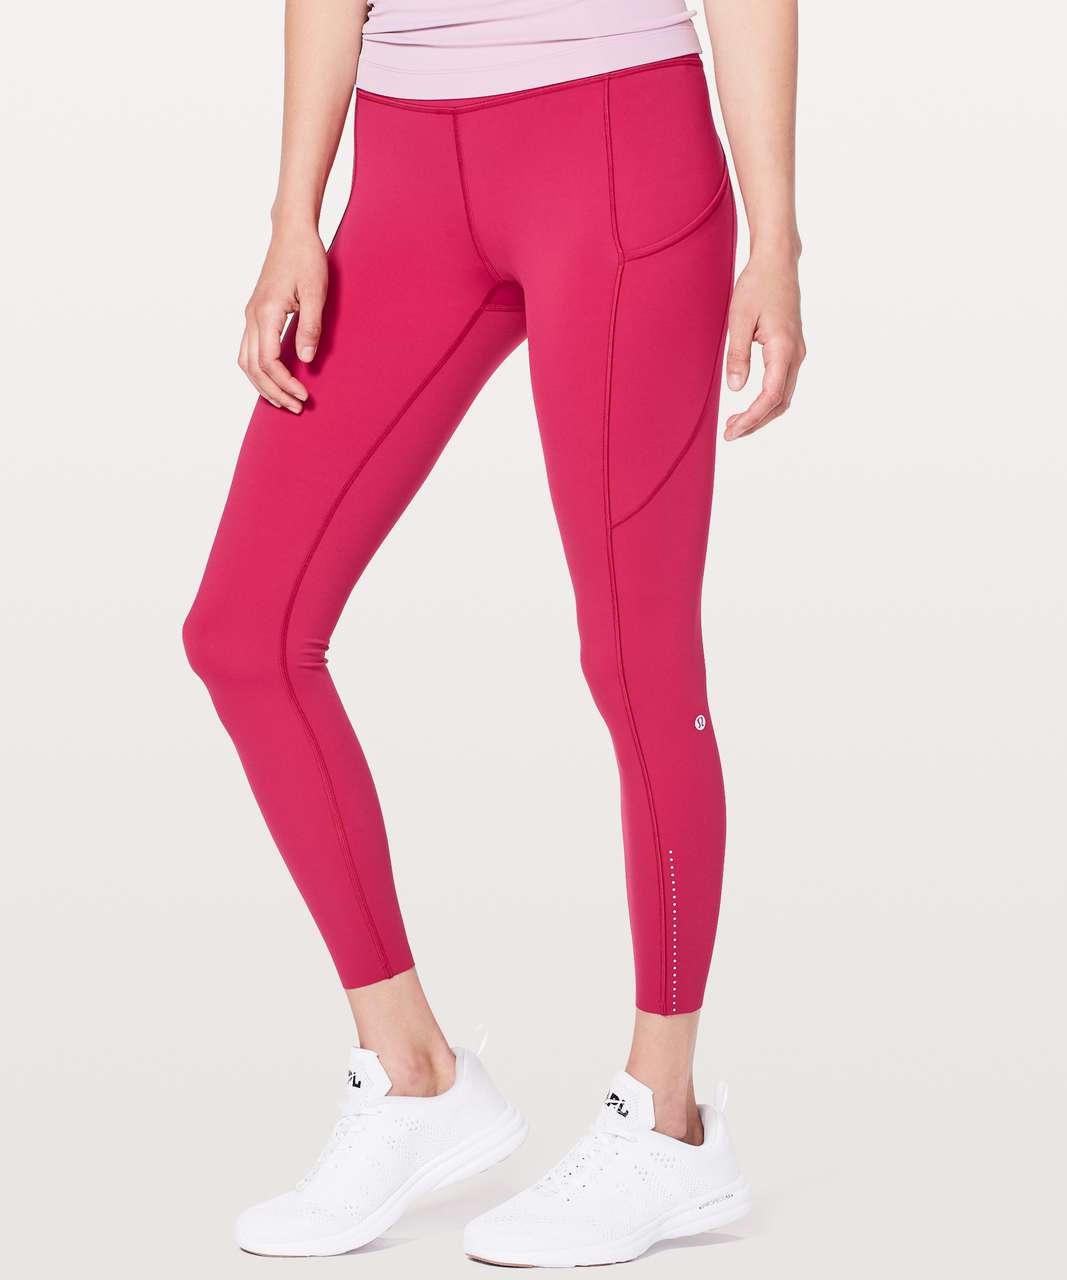 NWT Lululemon Chasing Miles Tight Nulux Leggings * Reflective * Red Sz 4  $128